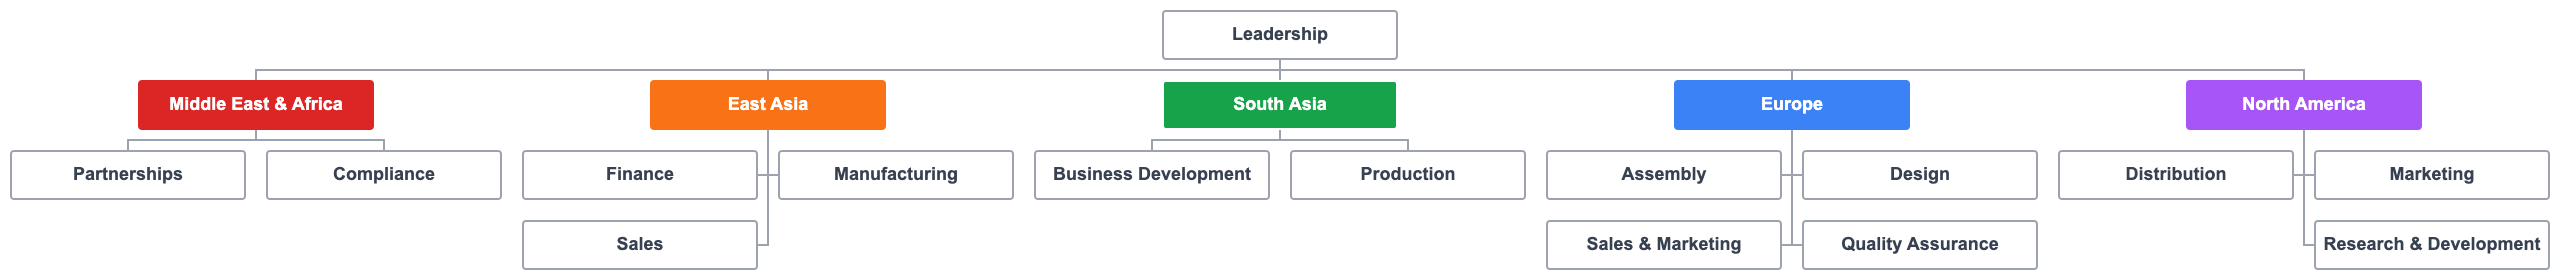 Geographical organizational structure